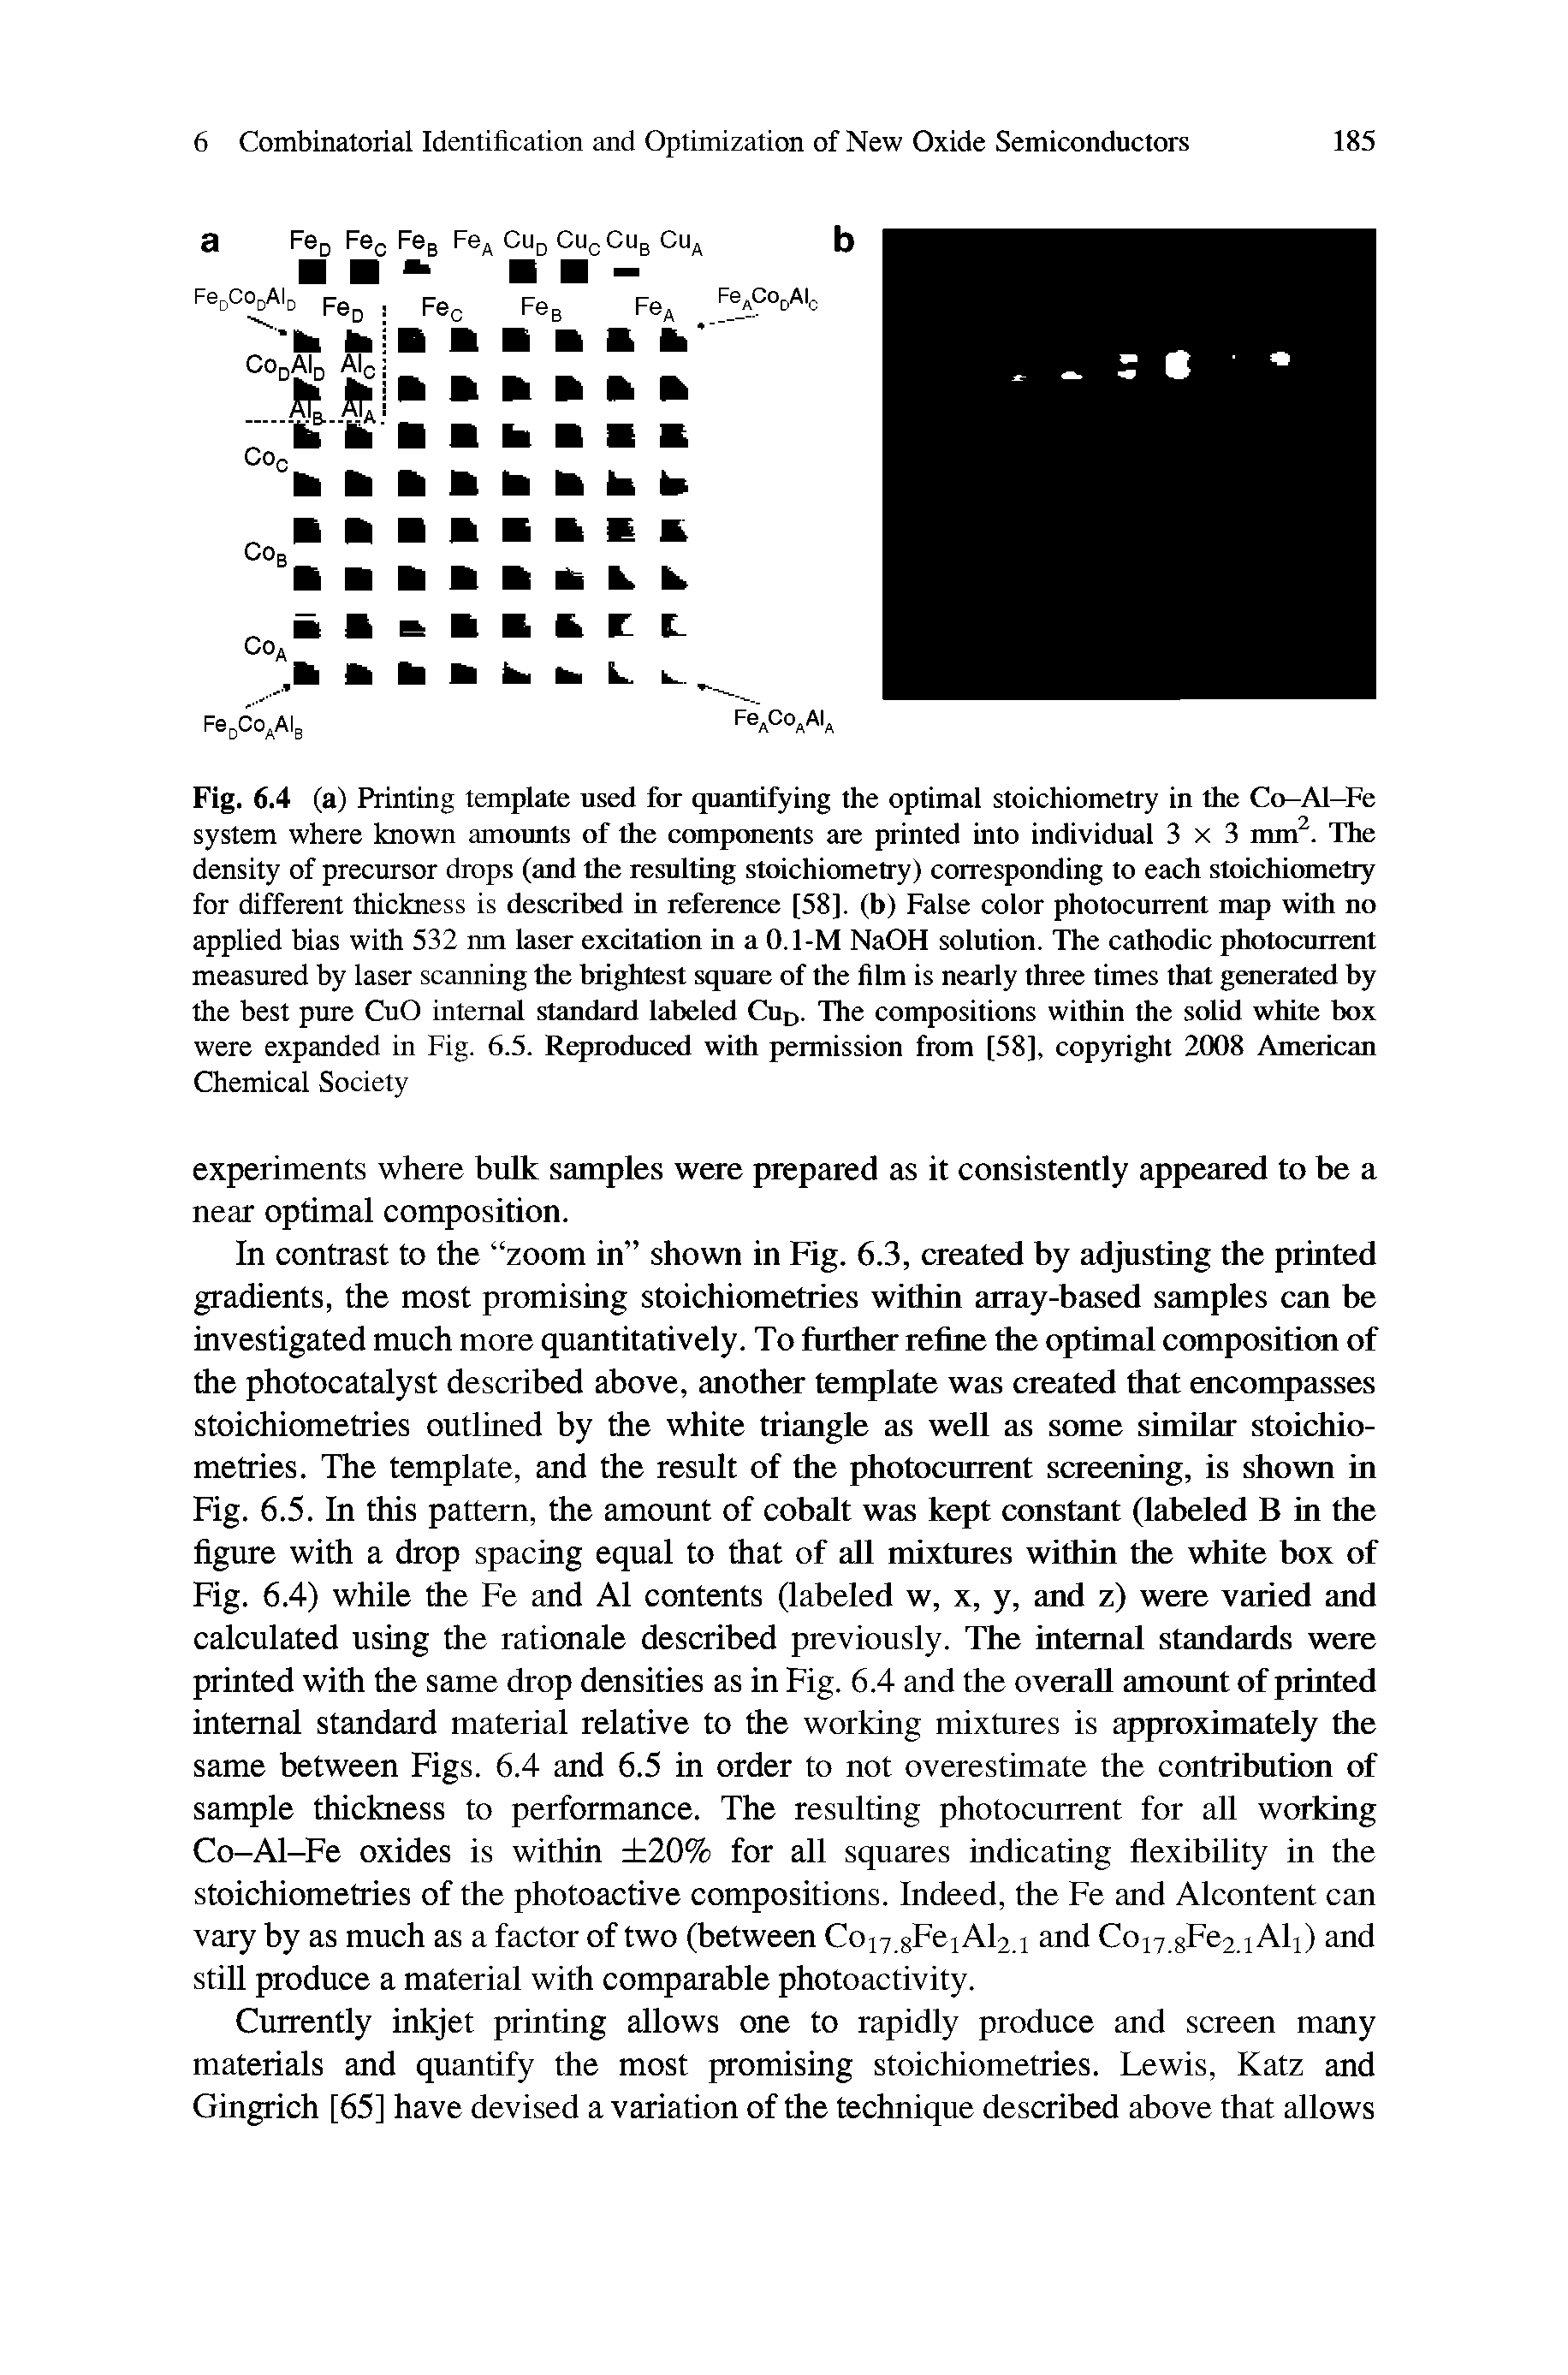 Fig. 6.4 (a) Printing template used for quantifying the optimal stoichiometry in the Co-Al-Fe system where known amounts of the components are printed into individual 3x3 mm. The density of precursor drops (and the resulting stoichiometry) corresponding to each stoichiometry for different thickness is described in reference [58]. (b) False color photocurrent map with no applied bias with 532 nm laser excitation in a 0.1-M NaOH solution. The cathodic photocurrent measured by laser scanning the brightest square of the film is nearly three times that generated by the best pure CuO internal standard labeled Cuj,. The compositions within the solid white box were expanded in Fig. 6.5. Reproduced with permission from [58], copyright 2008 American Chemical Society...